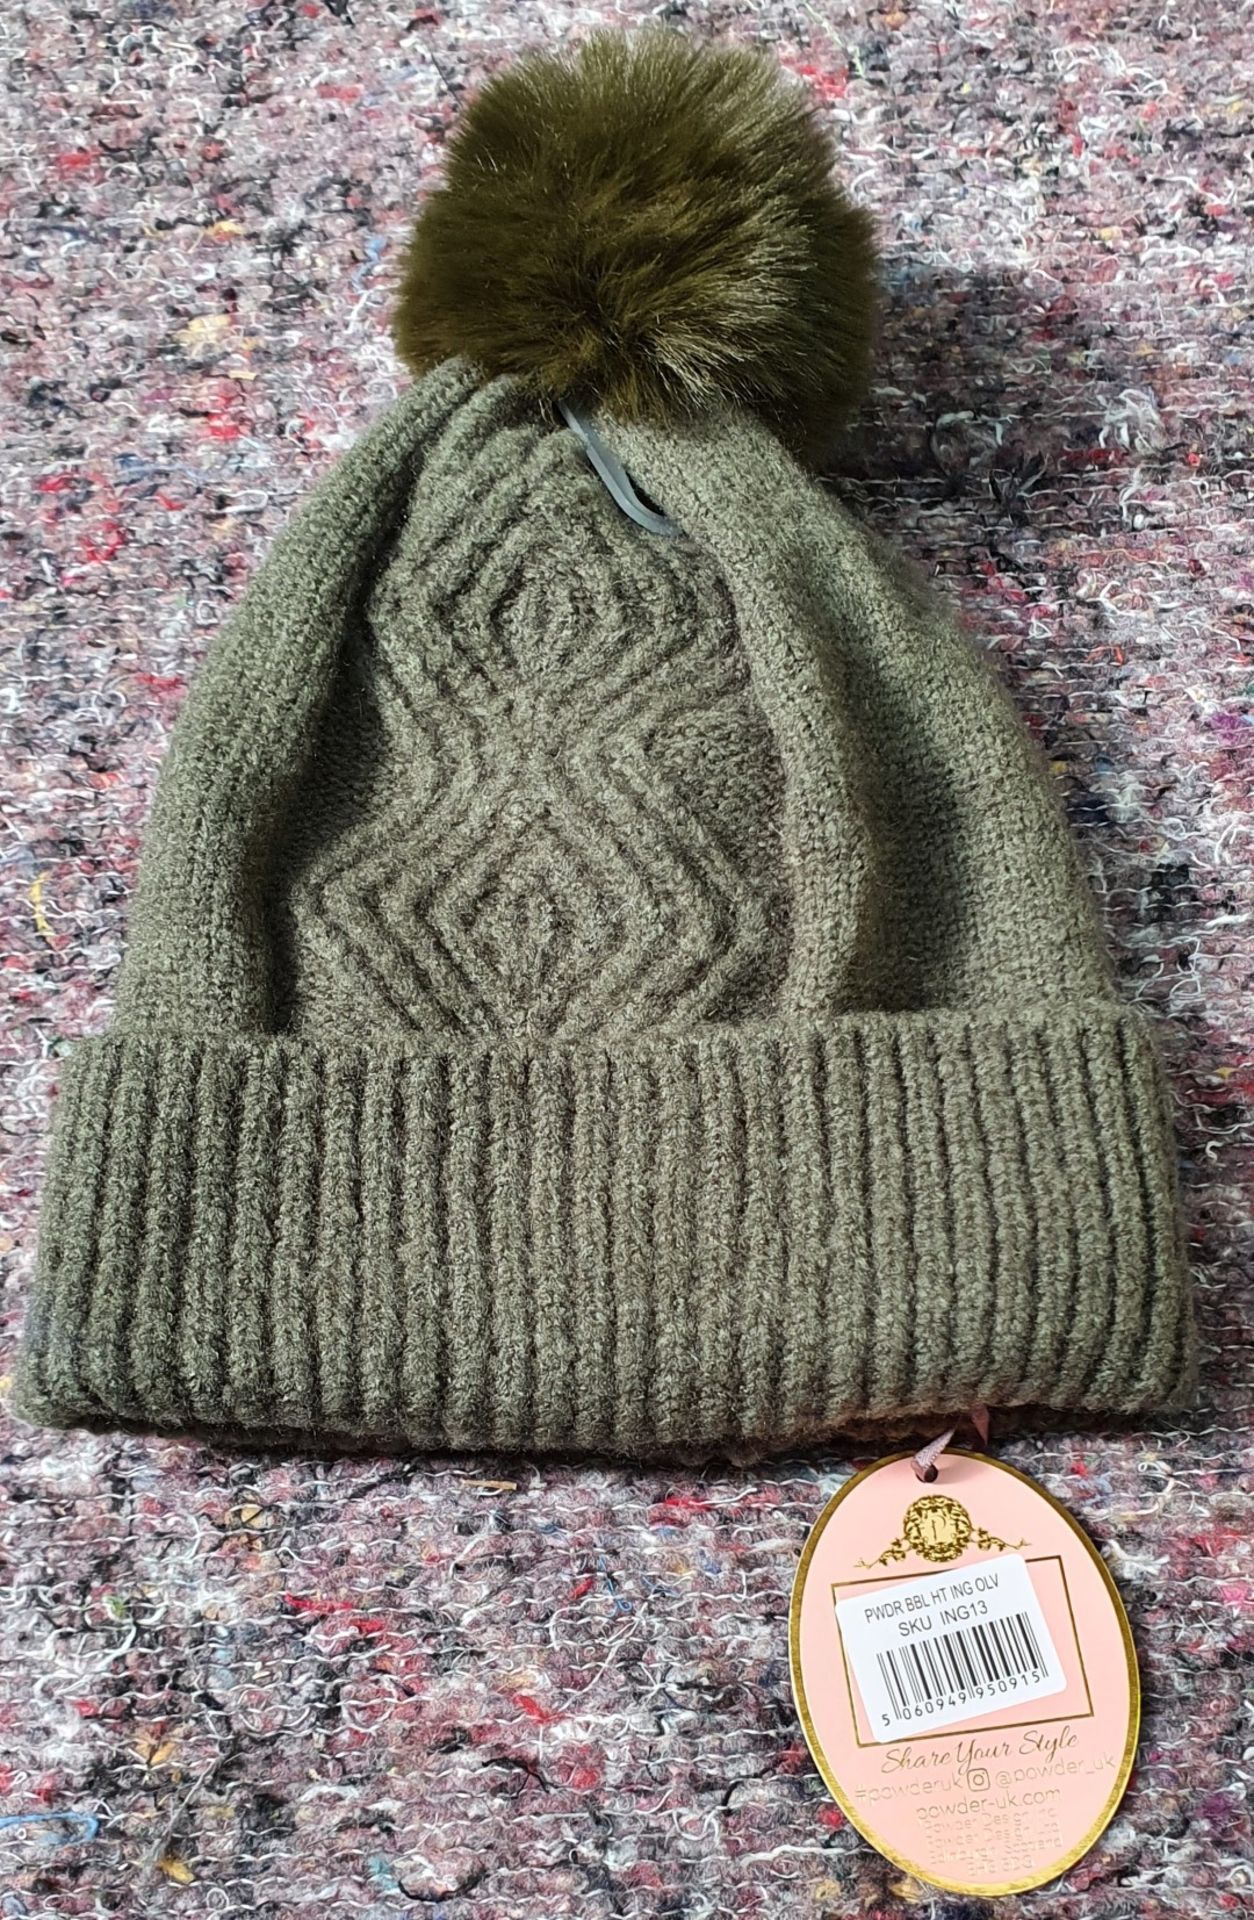 7 x Powder Adults Woolly Bobble Hats - New Stock - RRP Between £25-30 Each- Ref: TCH241 - CL840 - - Image 5 of 10